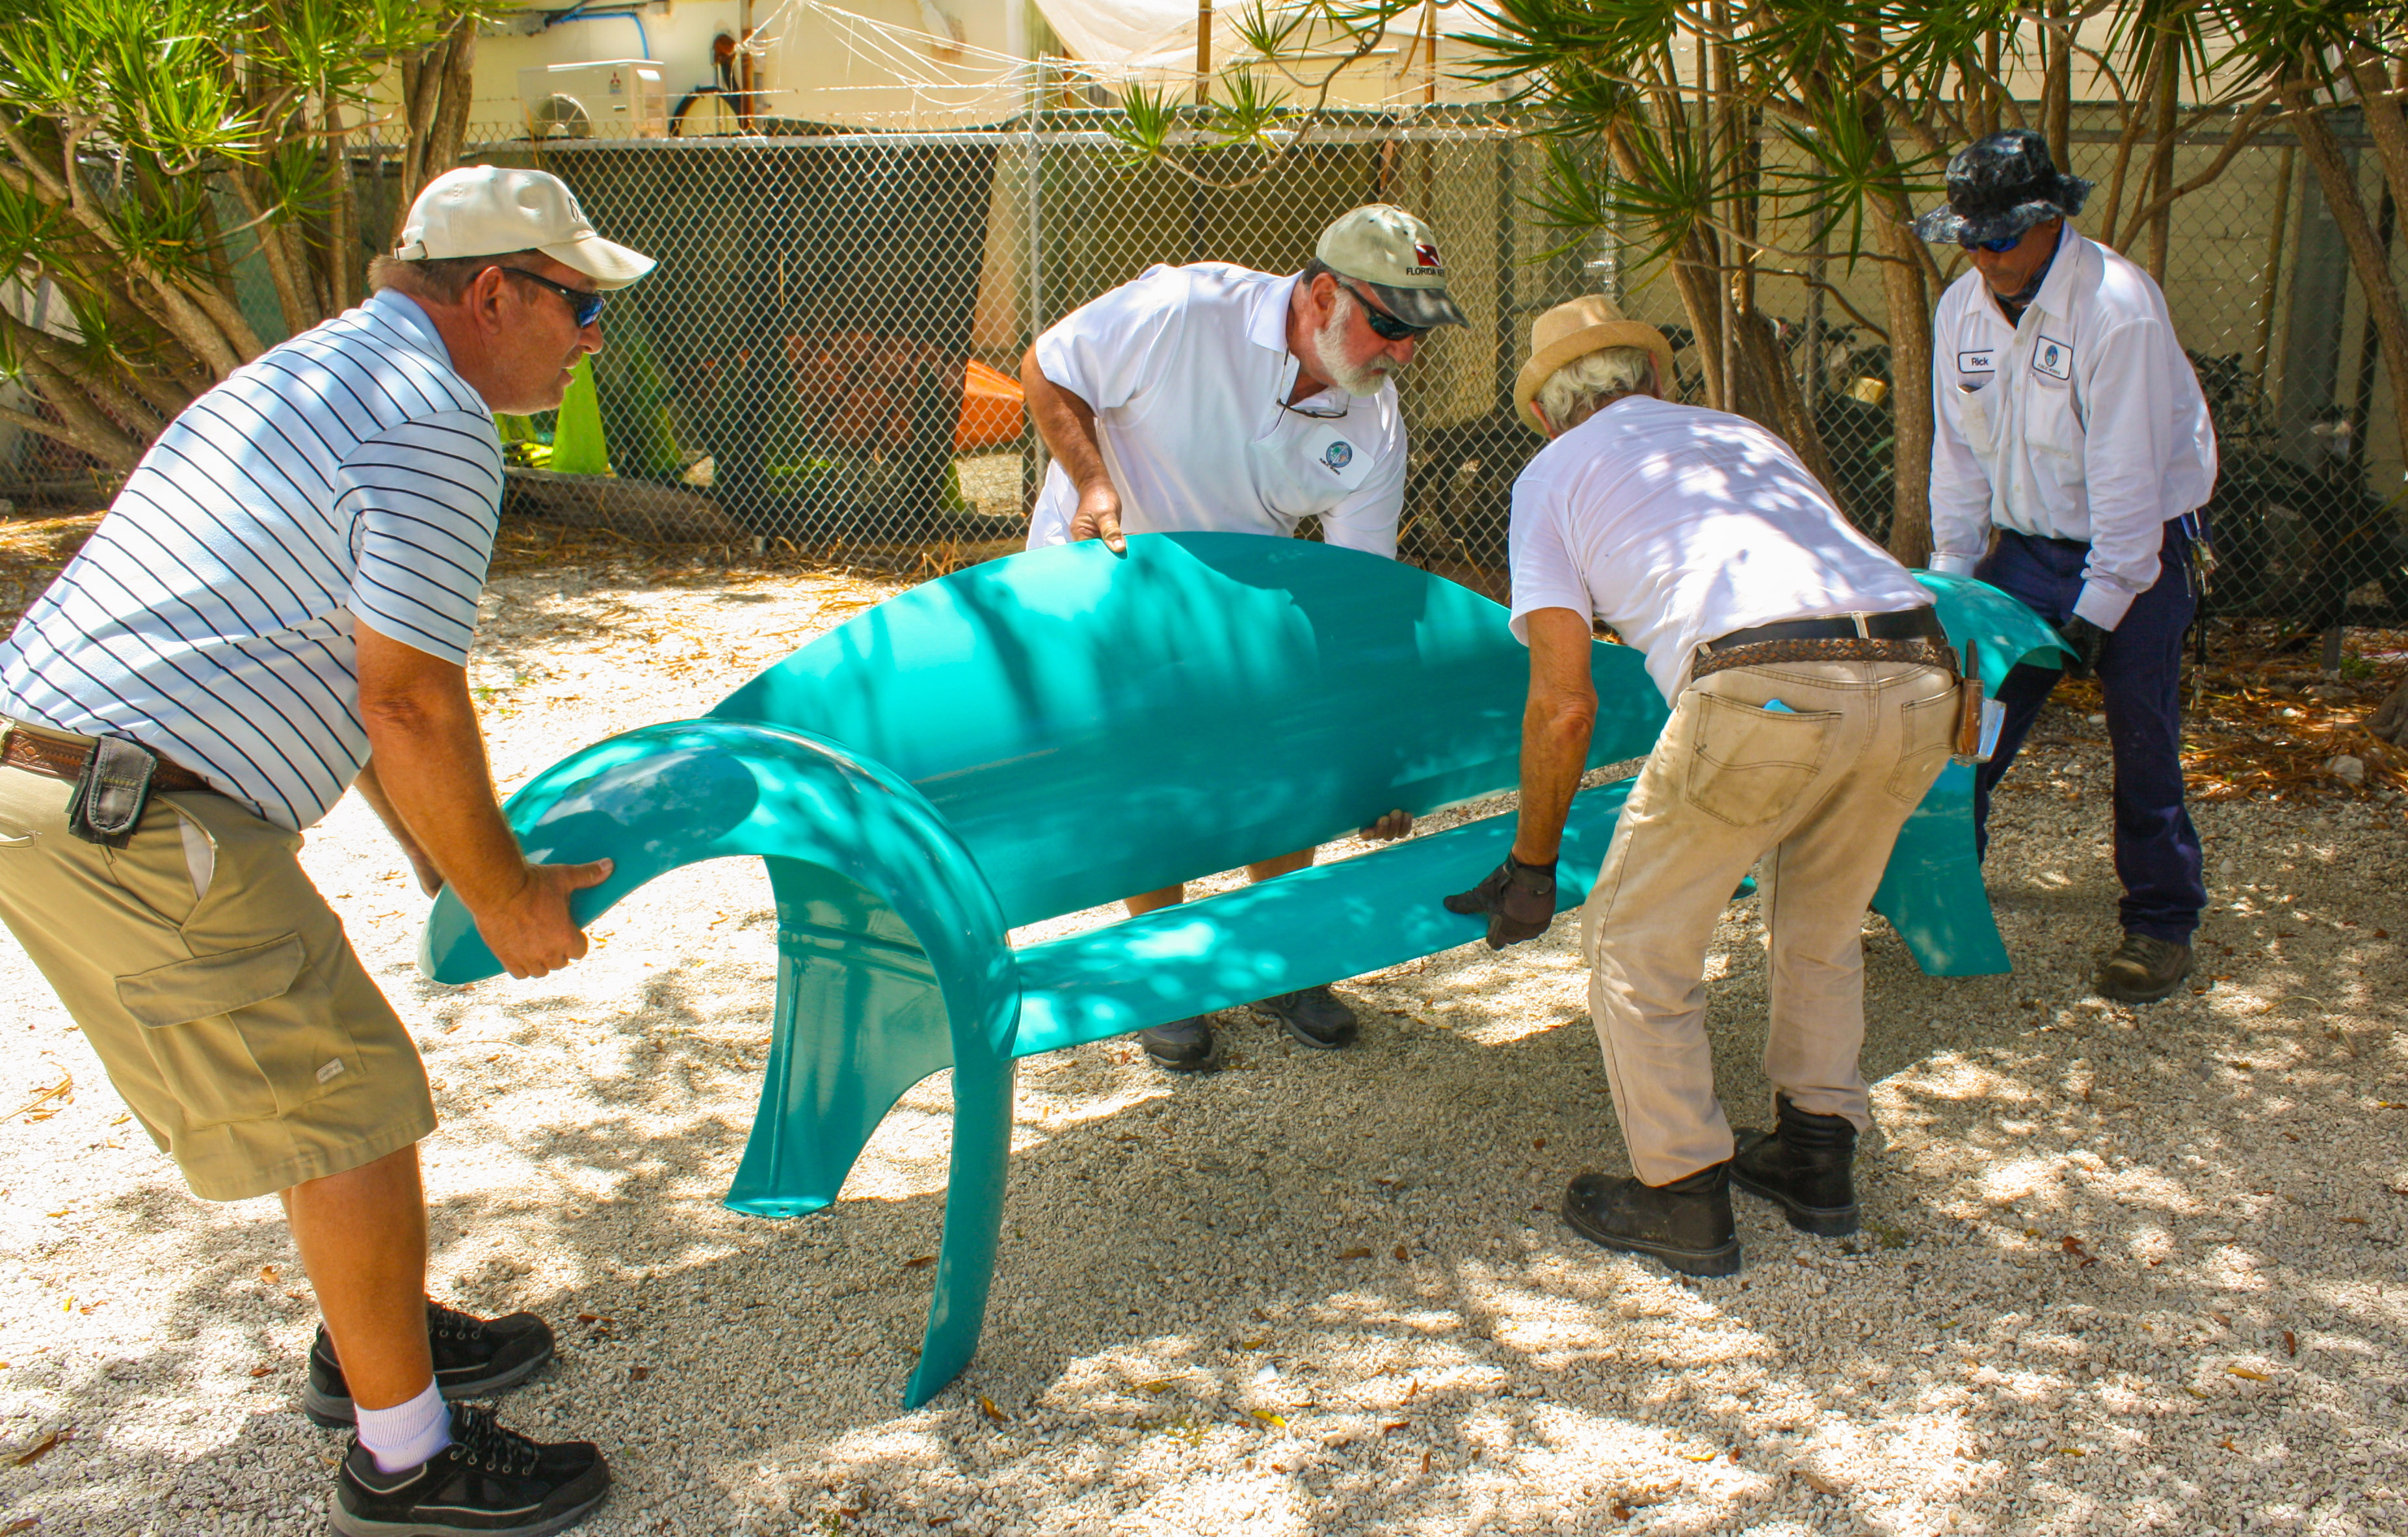 ART IN PUBLIC PLACES INSTALLS COLORFUL BENCHES MADE FROM PROPANE TANKS AT MARATHON COURTHOUSE